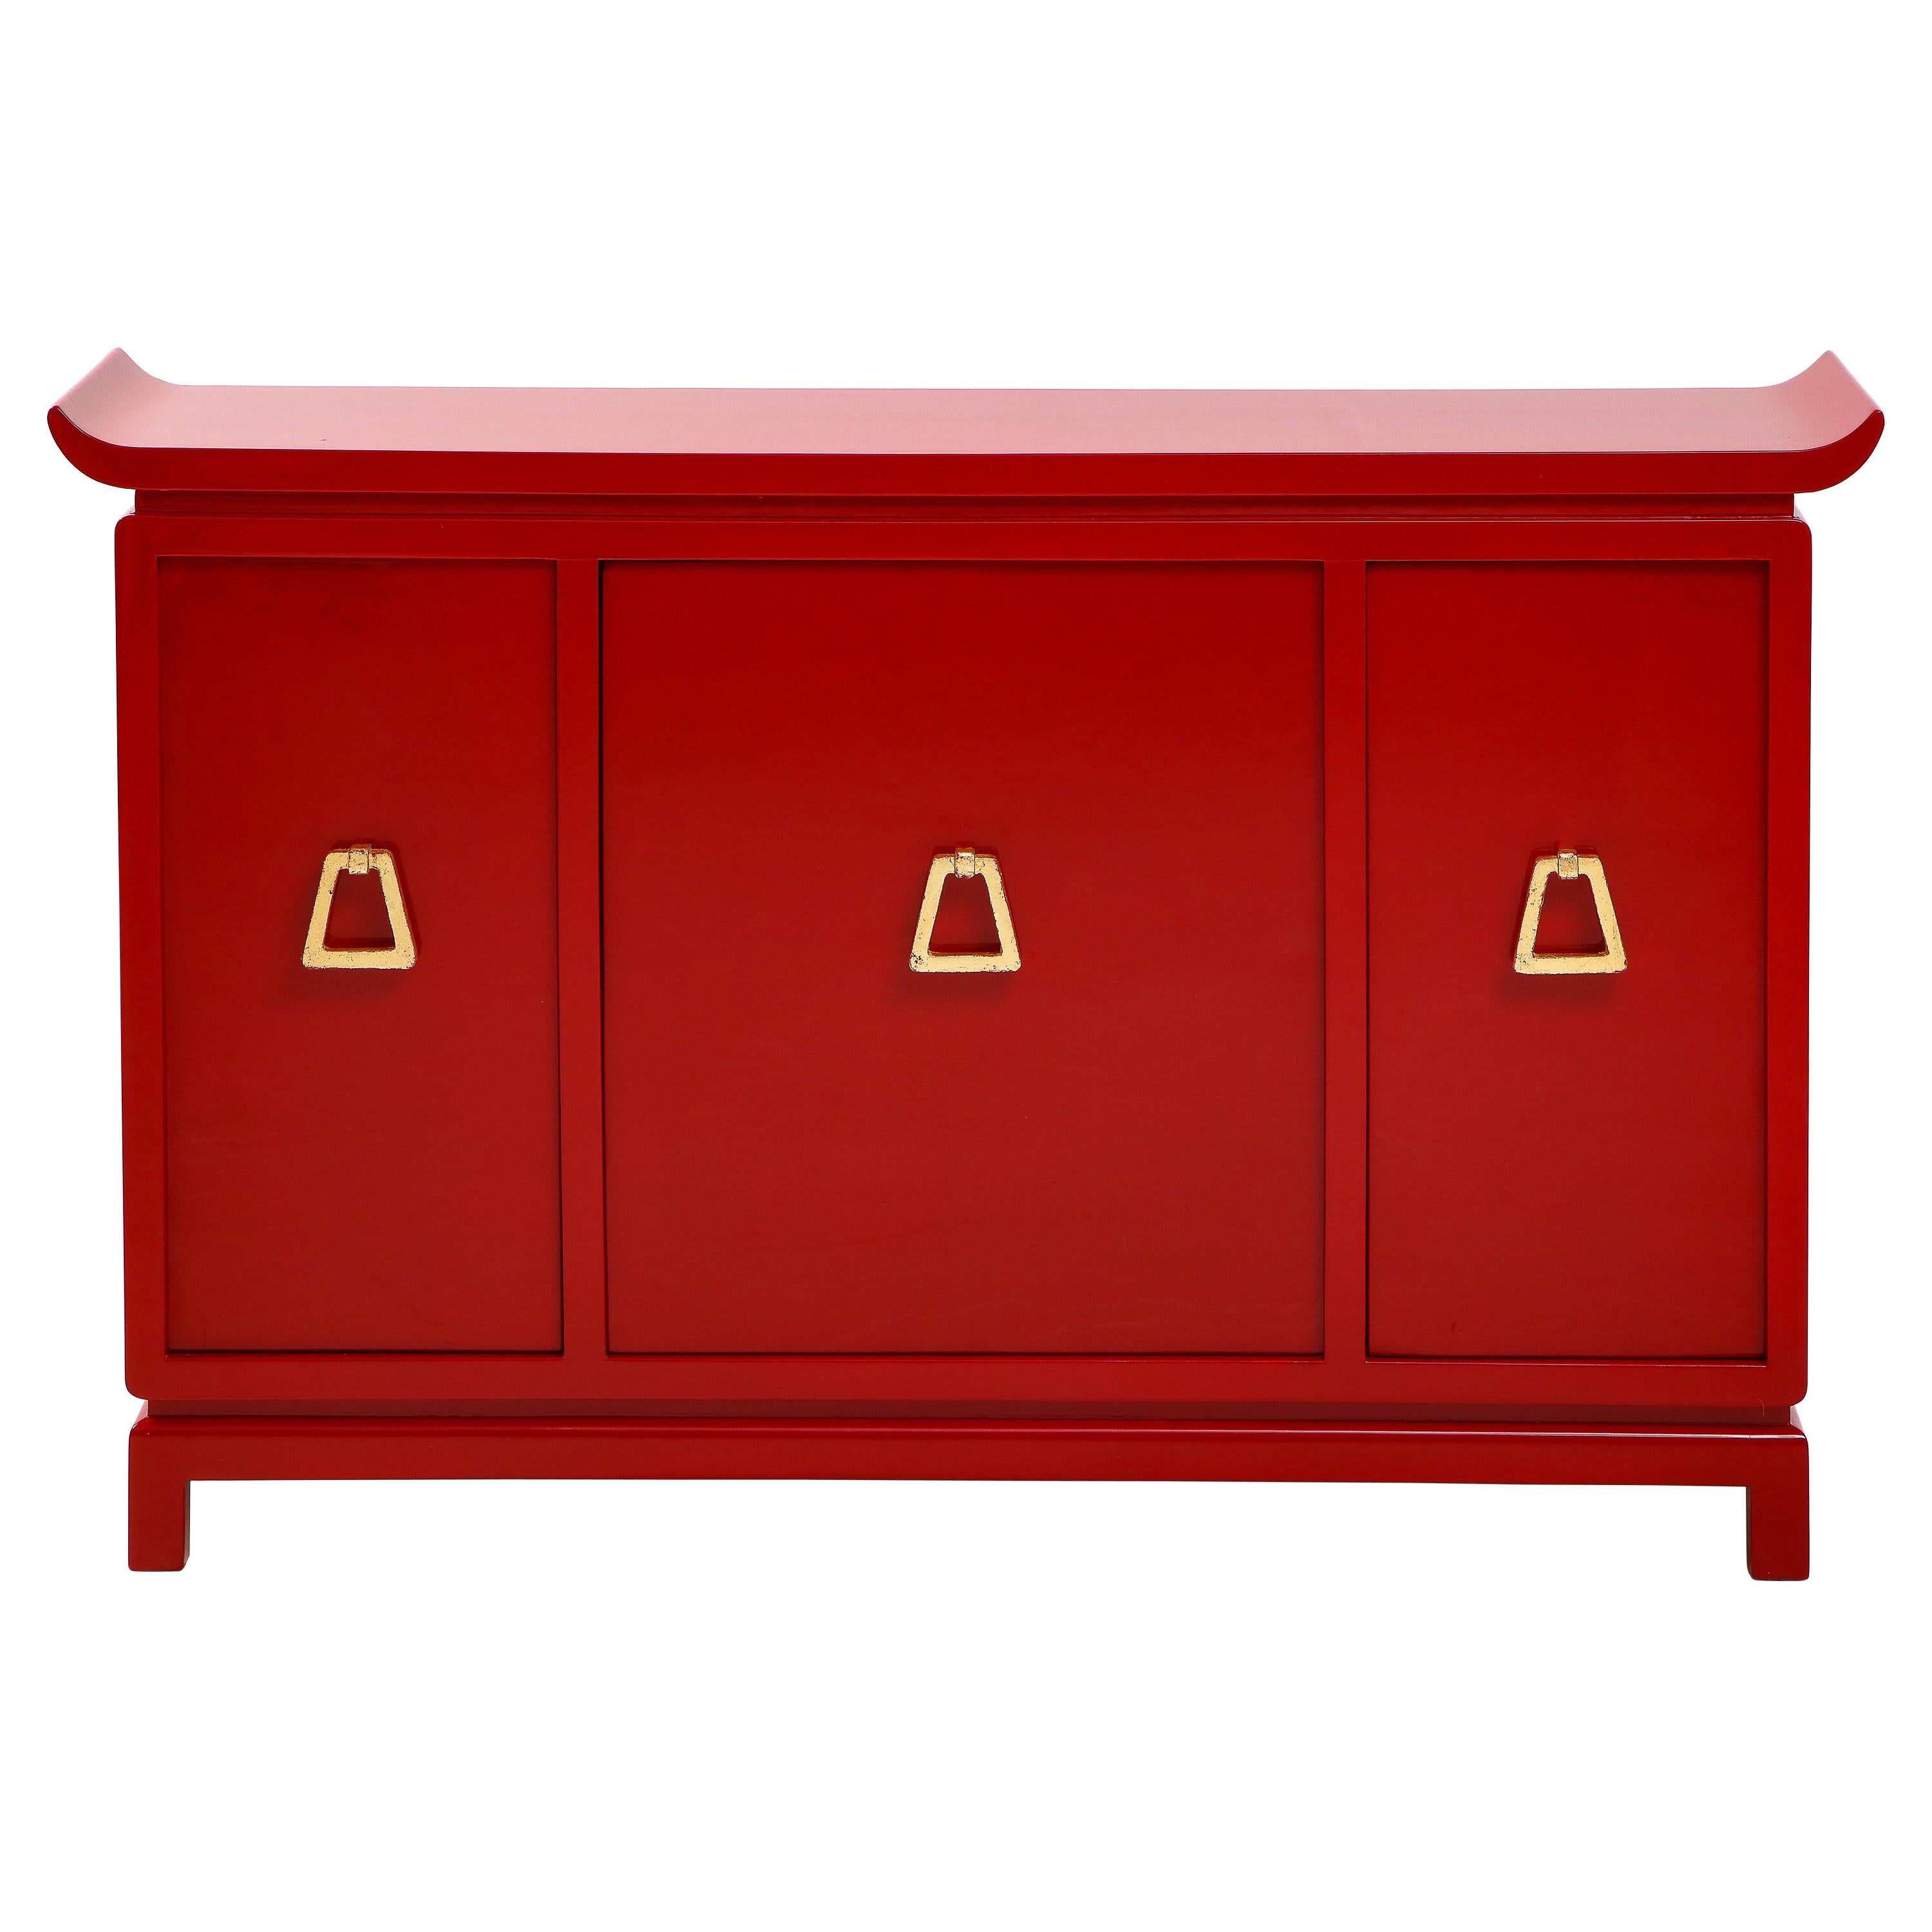 Beautiful Red Lacquered Cabinet by James Mont